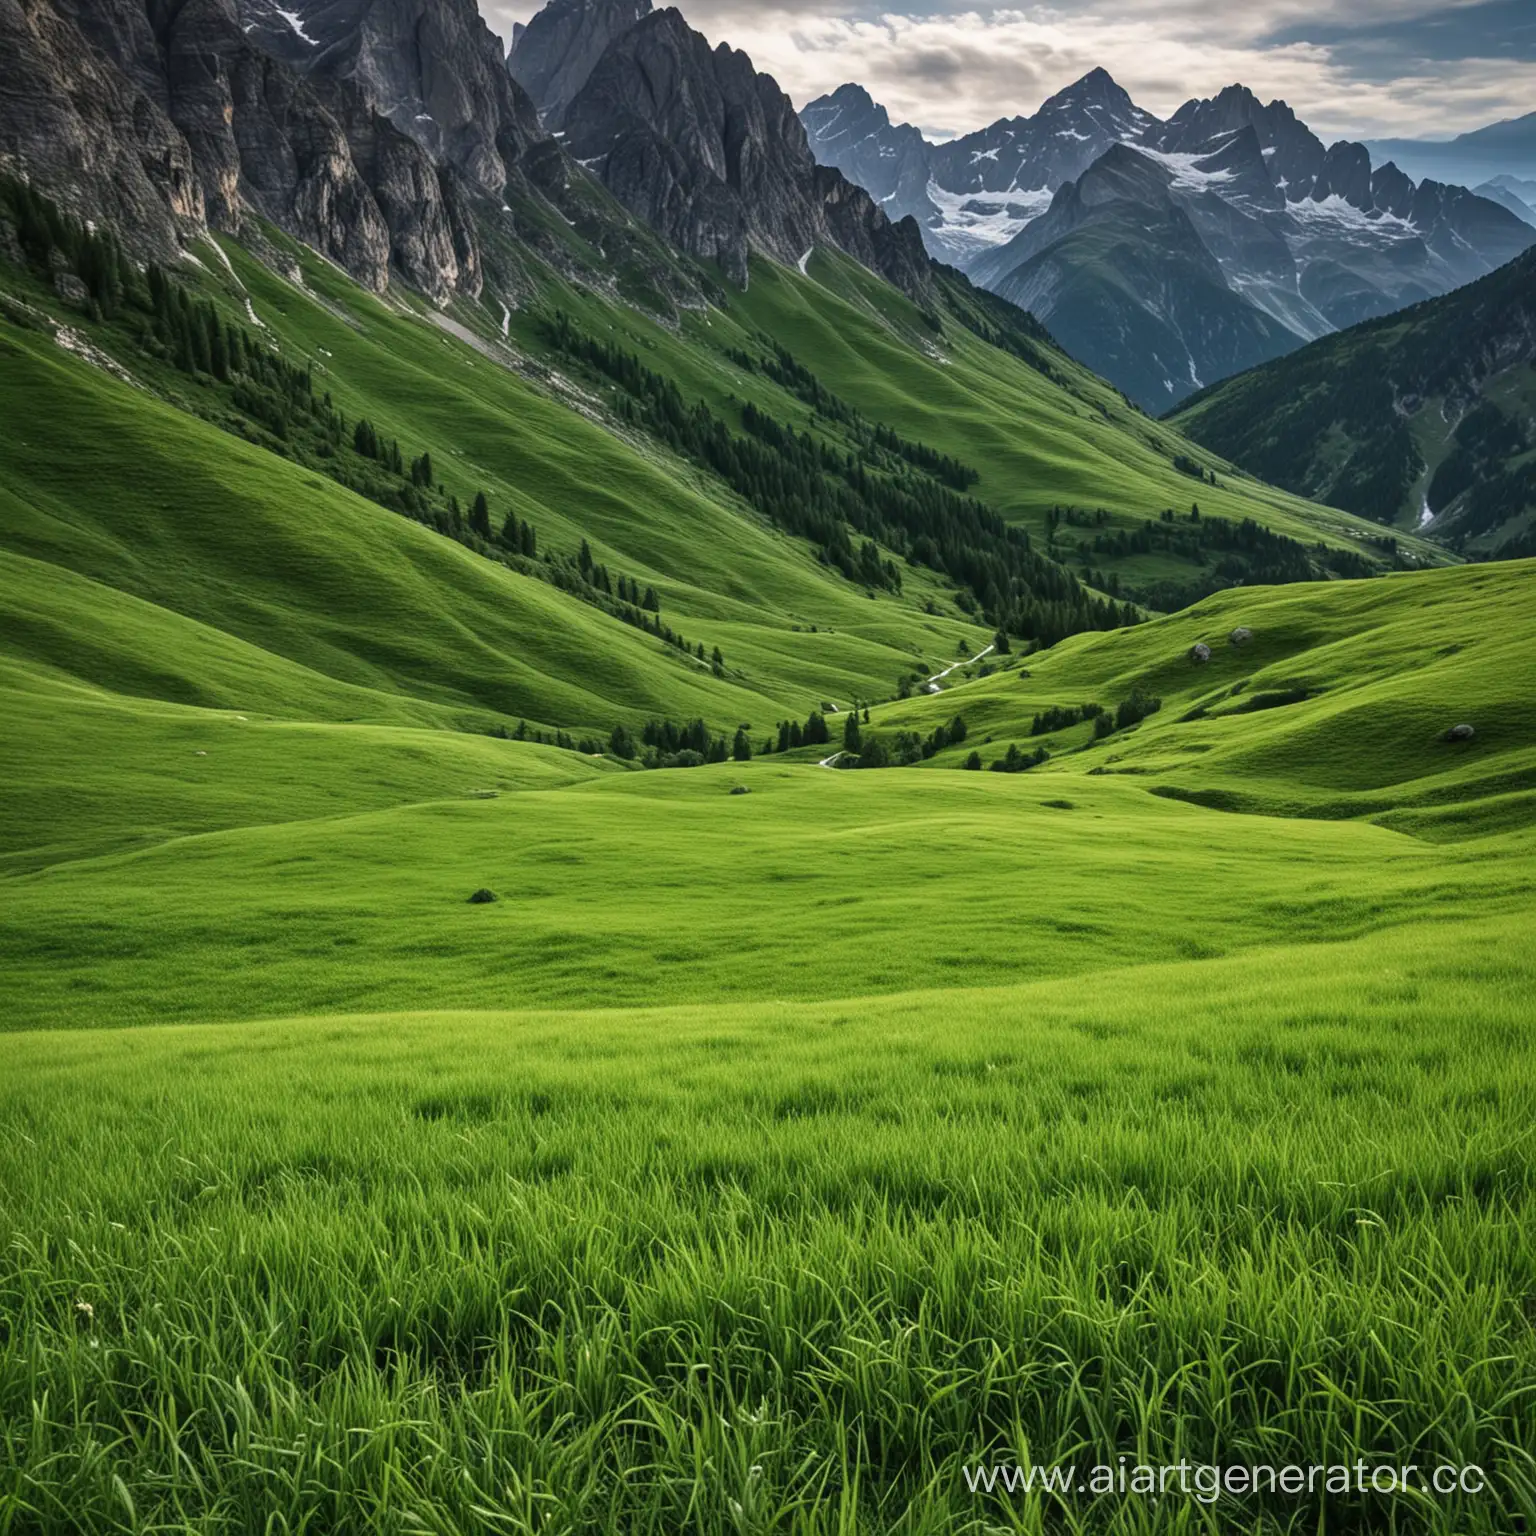 Serenity-in-Mountainous-Landscapes-Tranquil-Green-Grass-and-Towering-Peaks